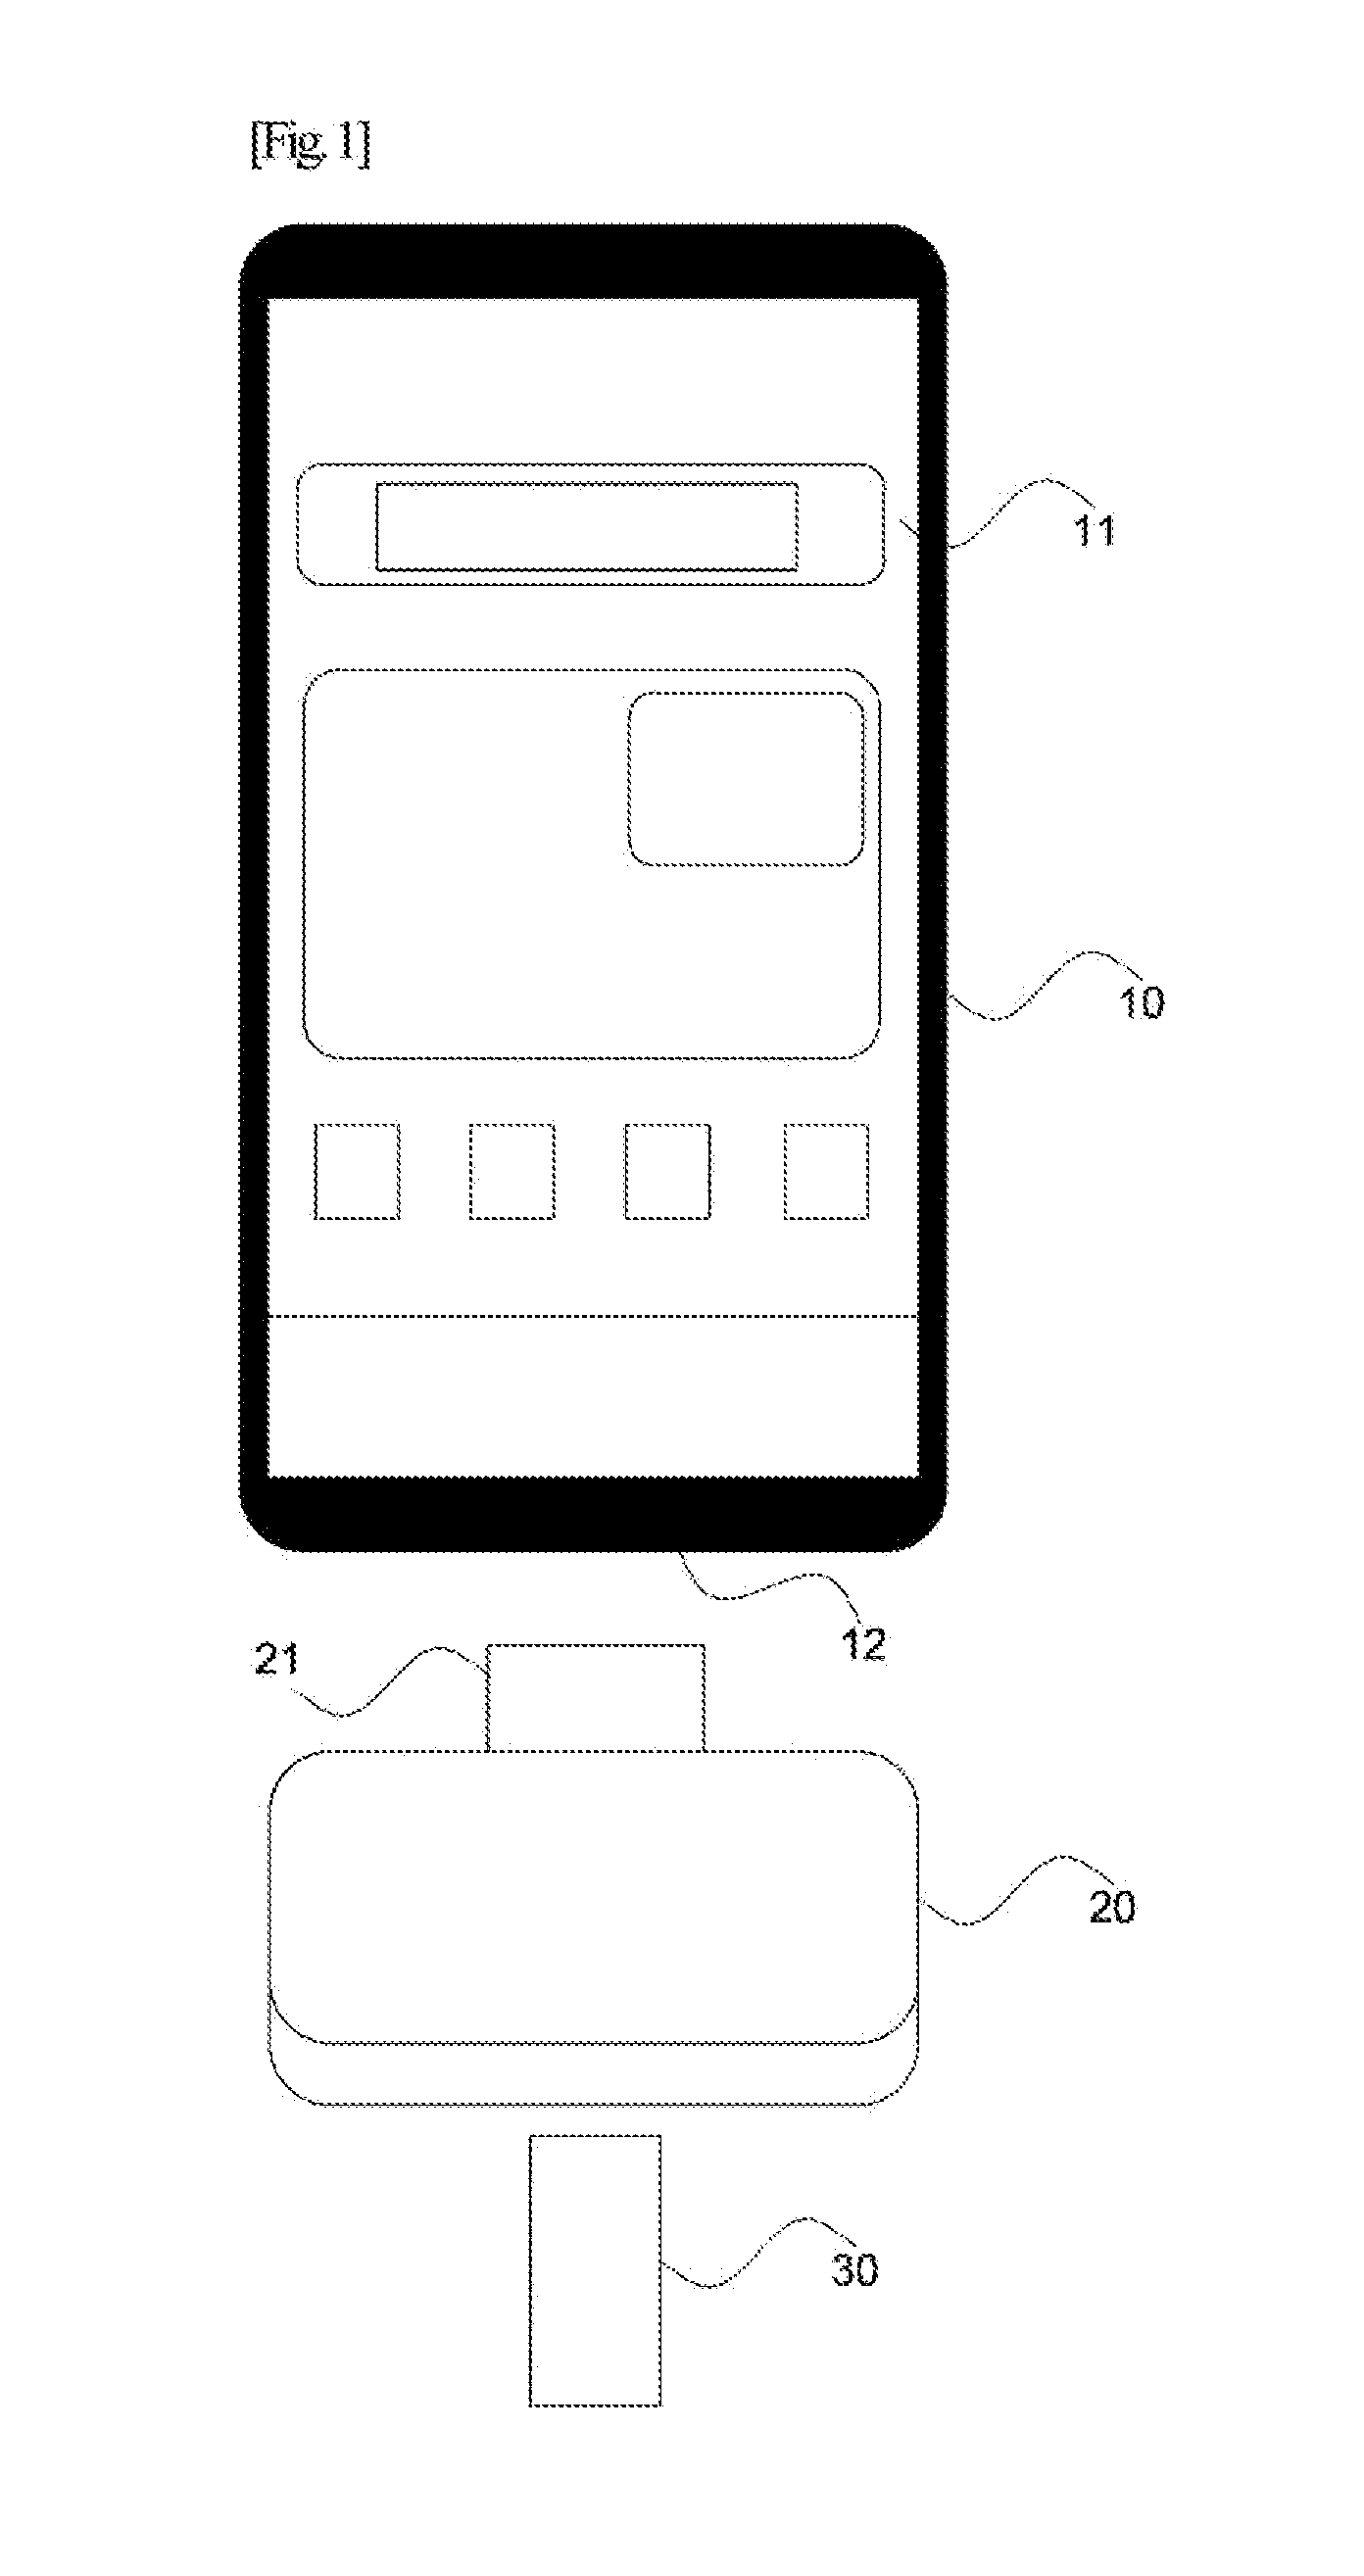 Blood glucose management device capable of generating valid blood glucose data, and operation method therefor